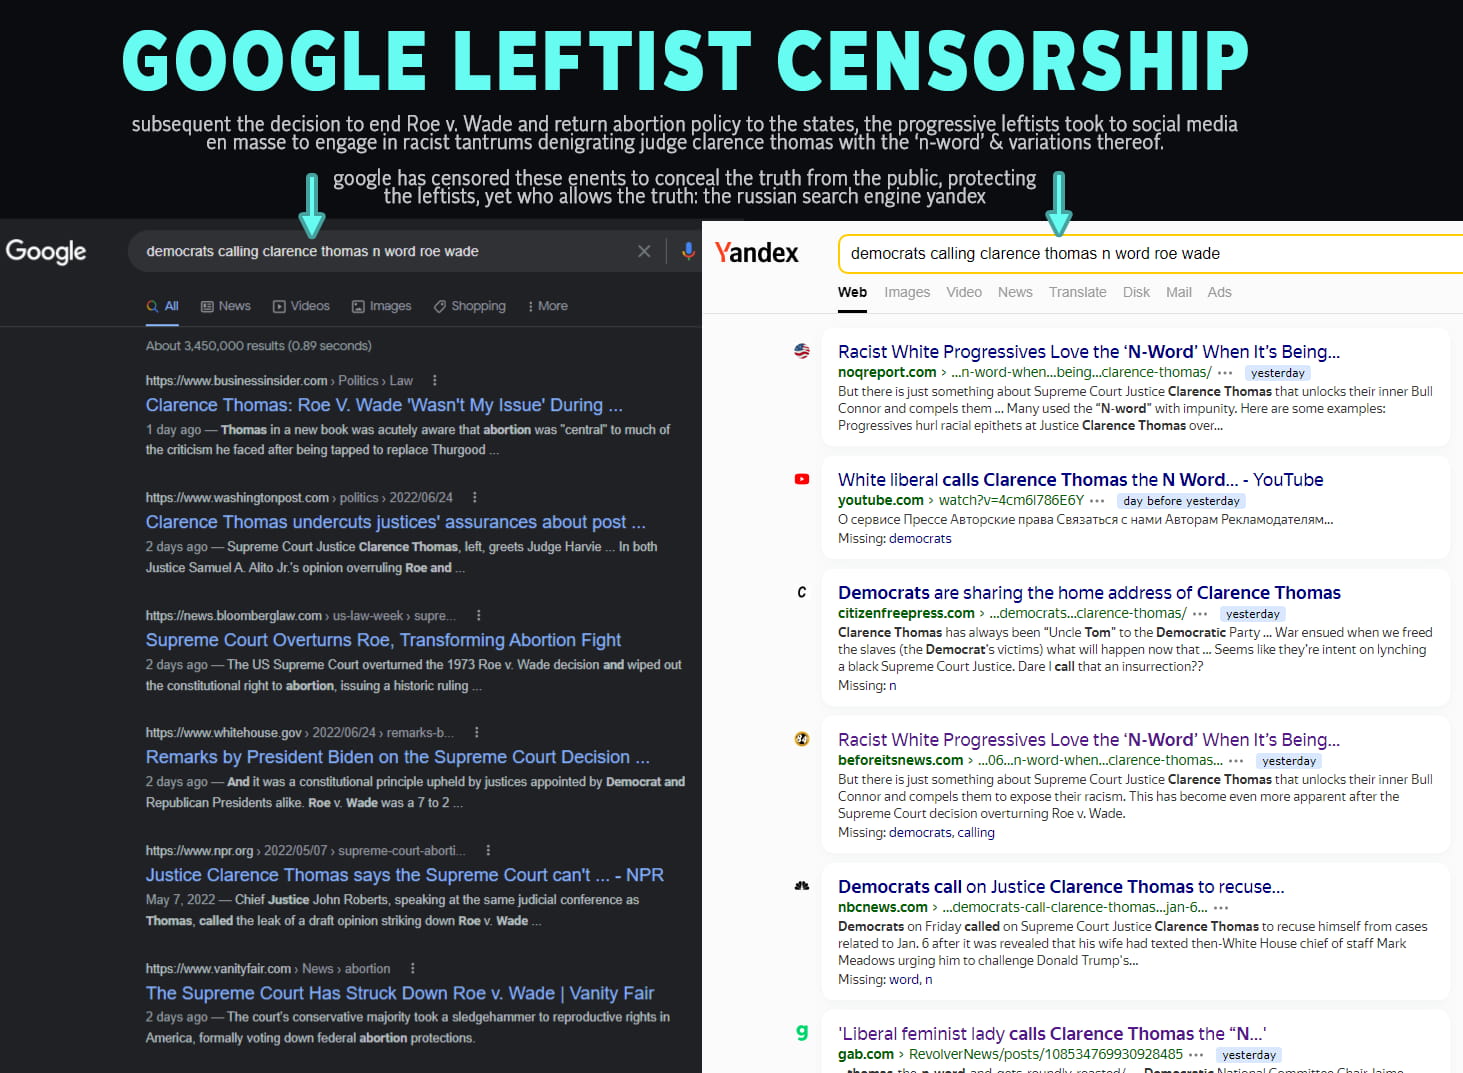 More evidence that Google censors to protect the progressive left